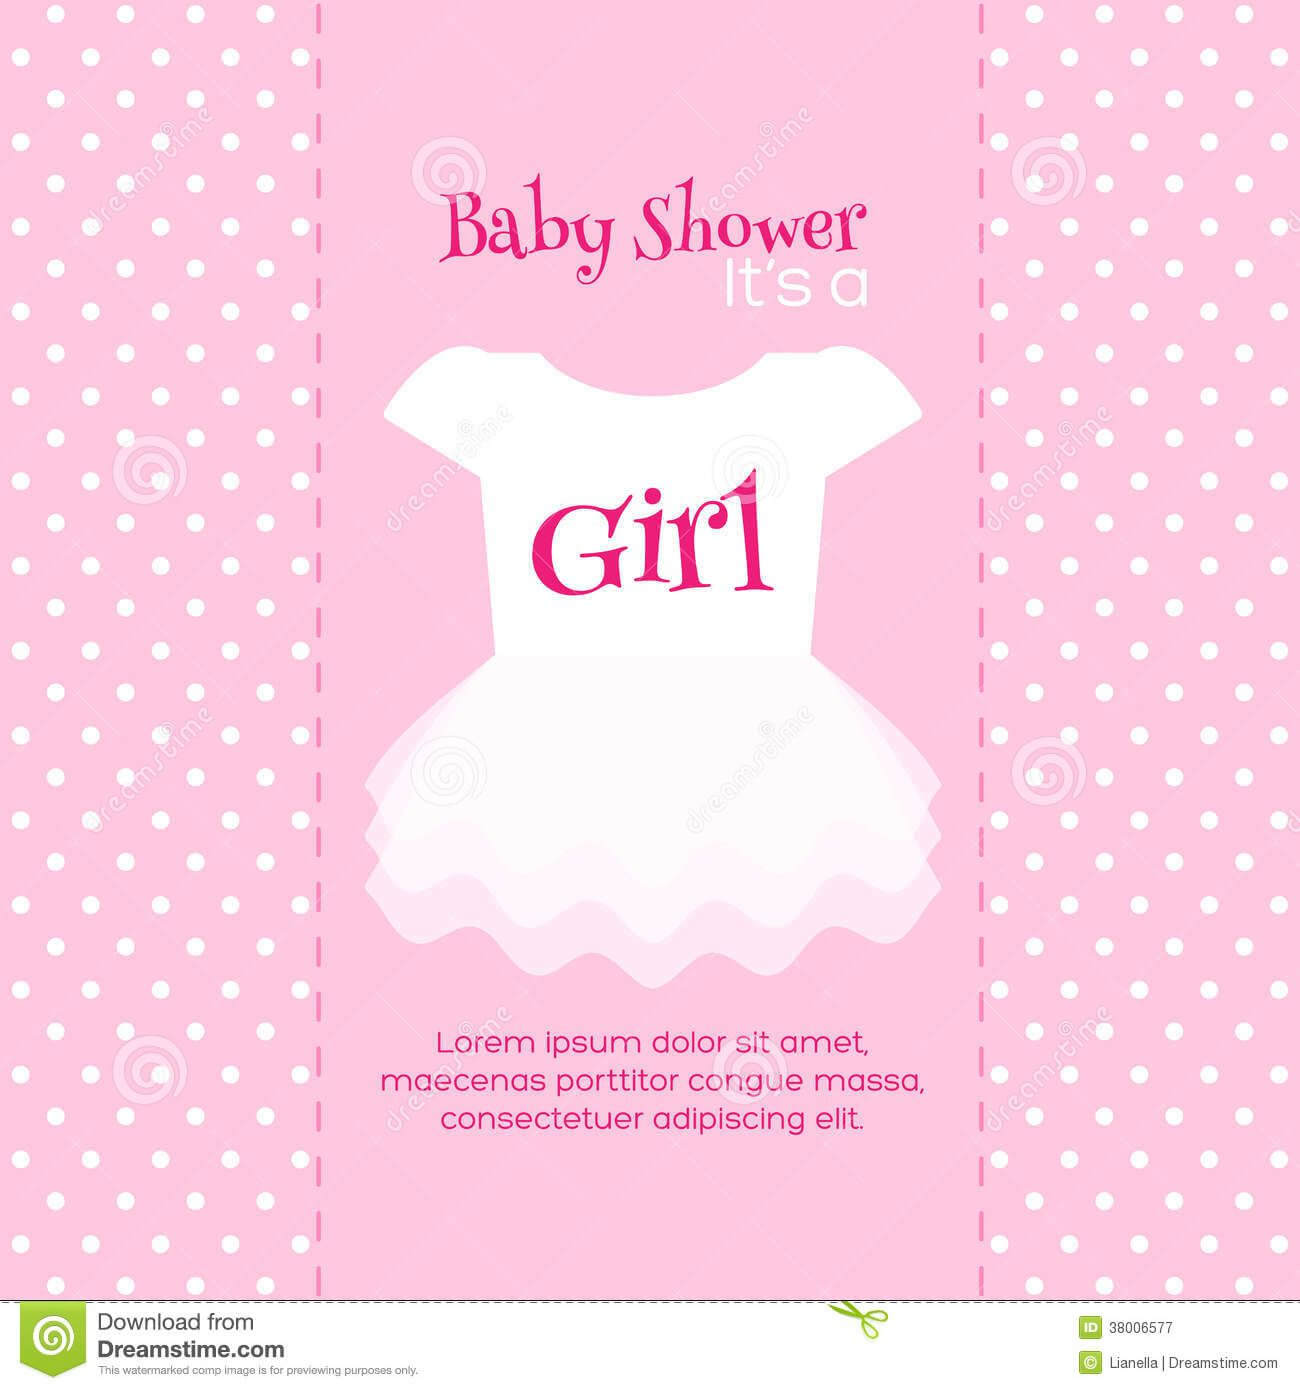 Baby Shower Invitations Cards Designs : Free Baby Shower Within Baby Shower Flyer Templates Free